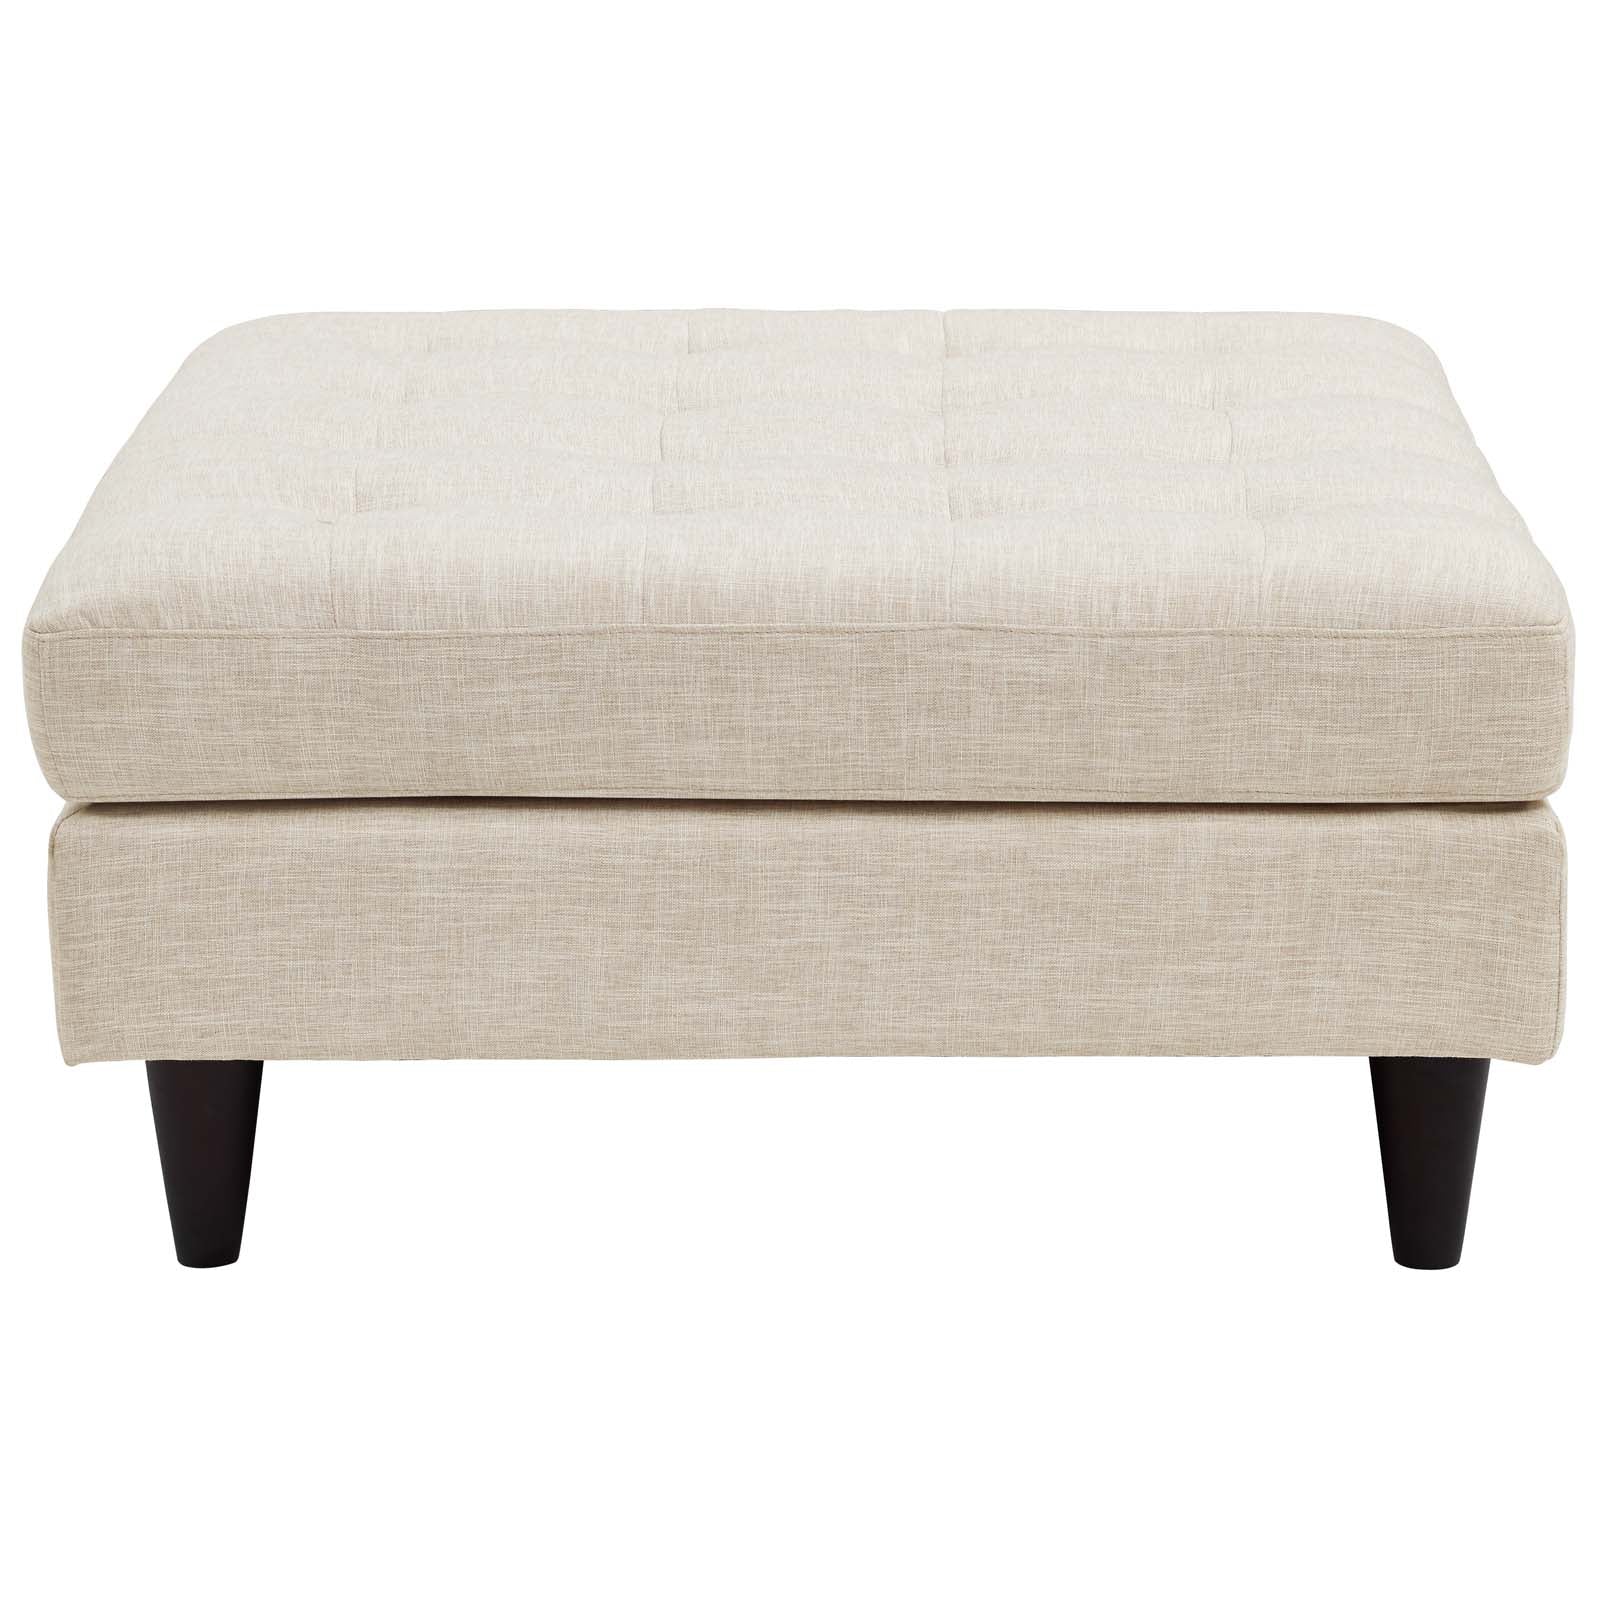 Modway Ottomans & Stools - Empress Upholstered Fabric Large Ottoman Beige